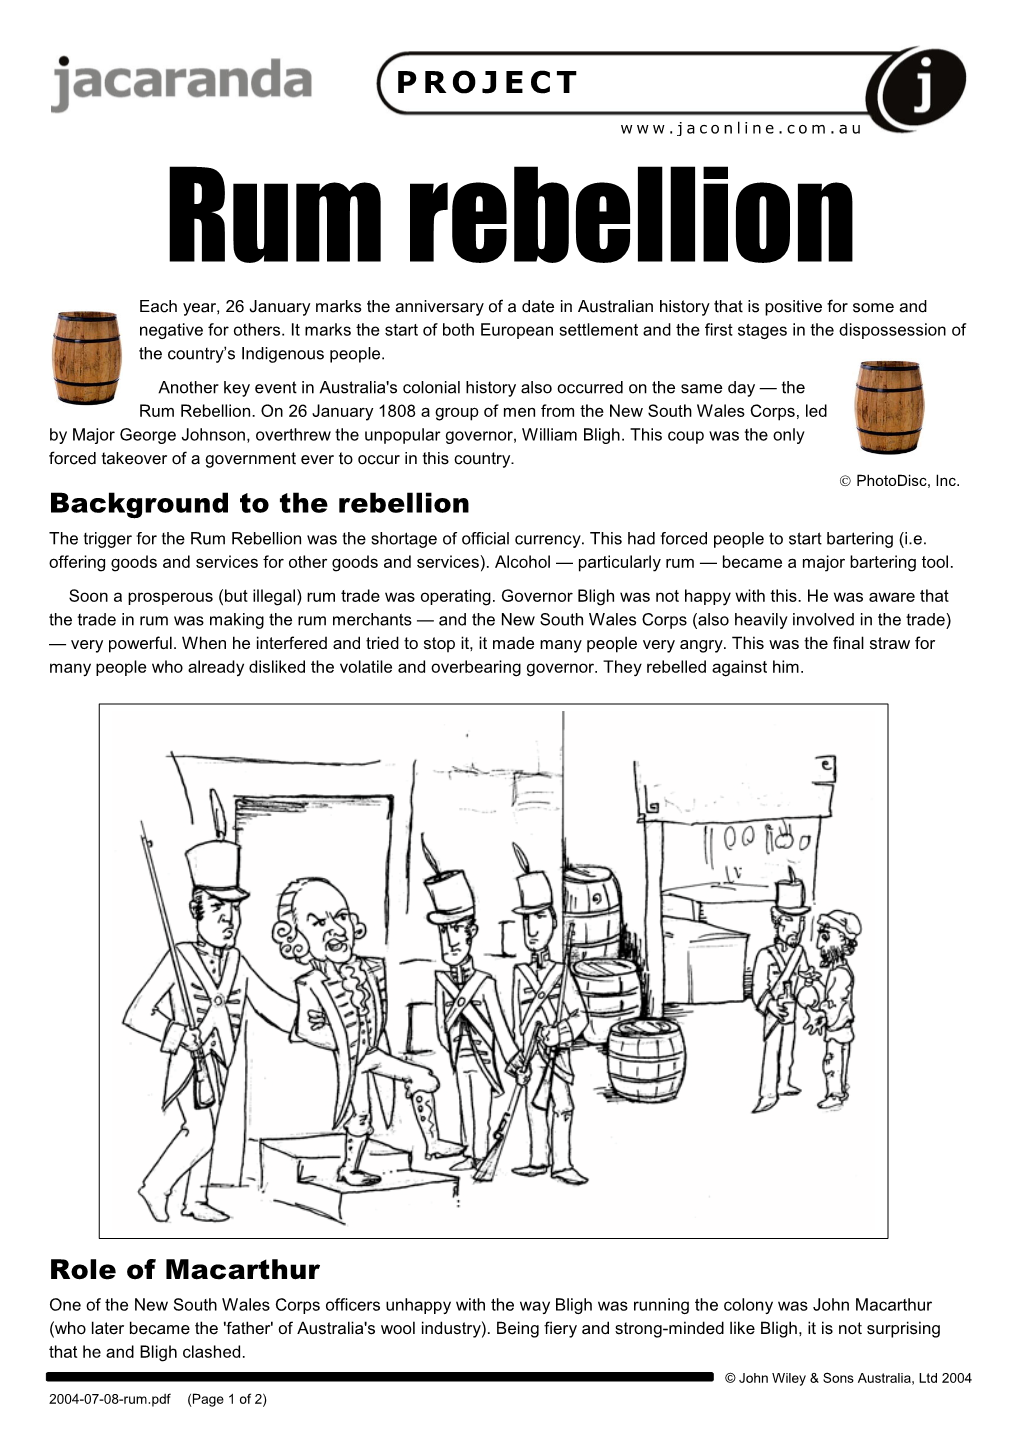 Rum Rebellion Each Year, 26 January Marks the Anniversary of a Date in Australian History That Is Positive for Some and Negative for Others